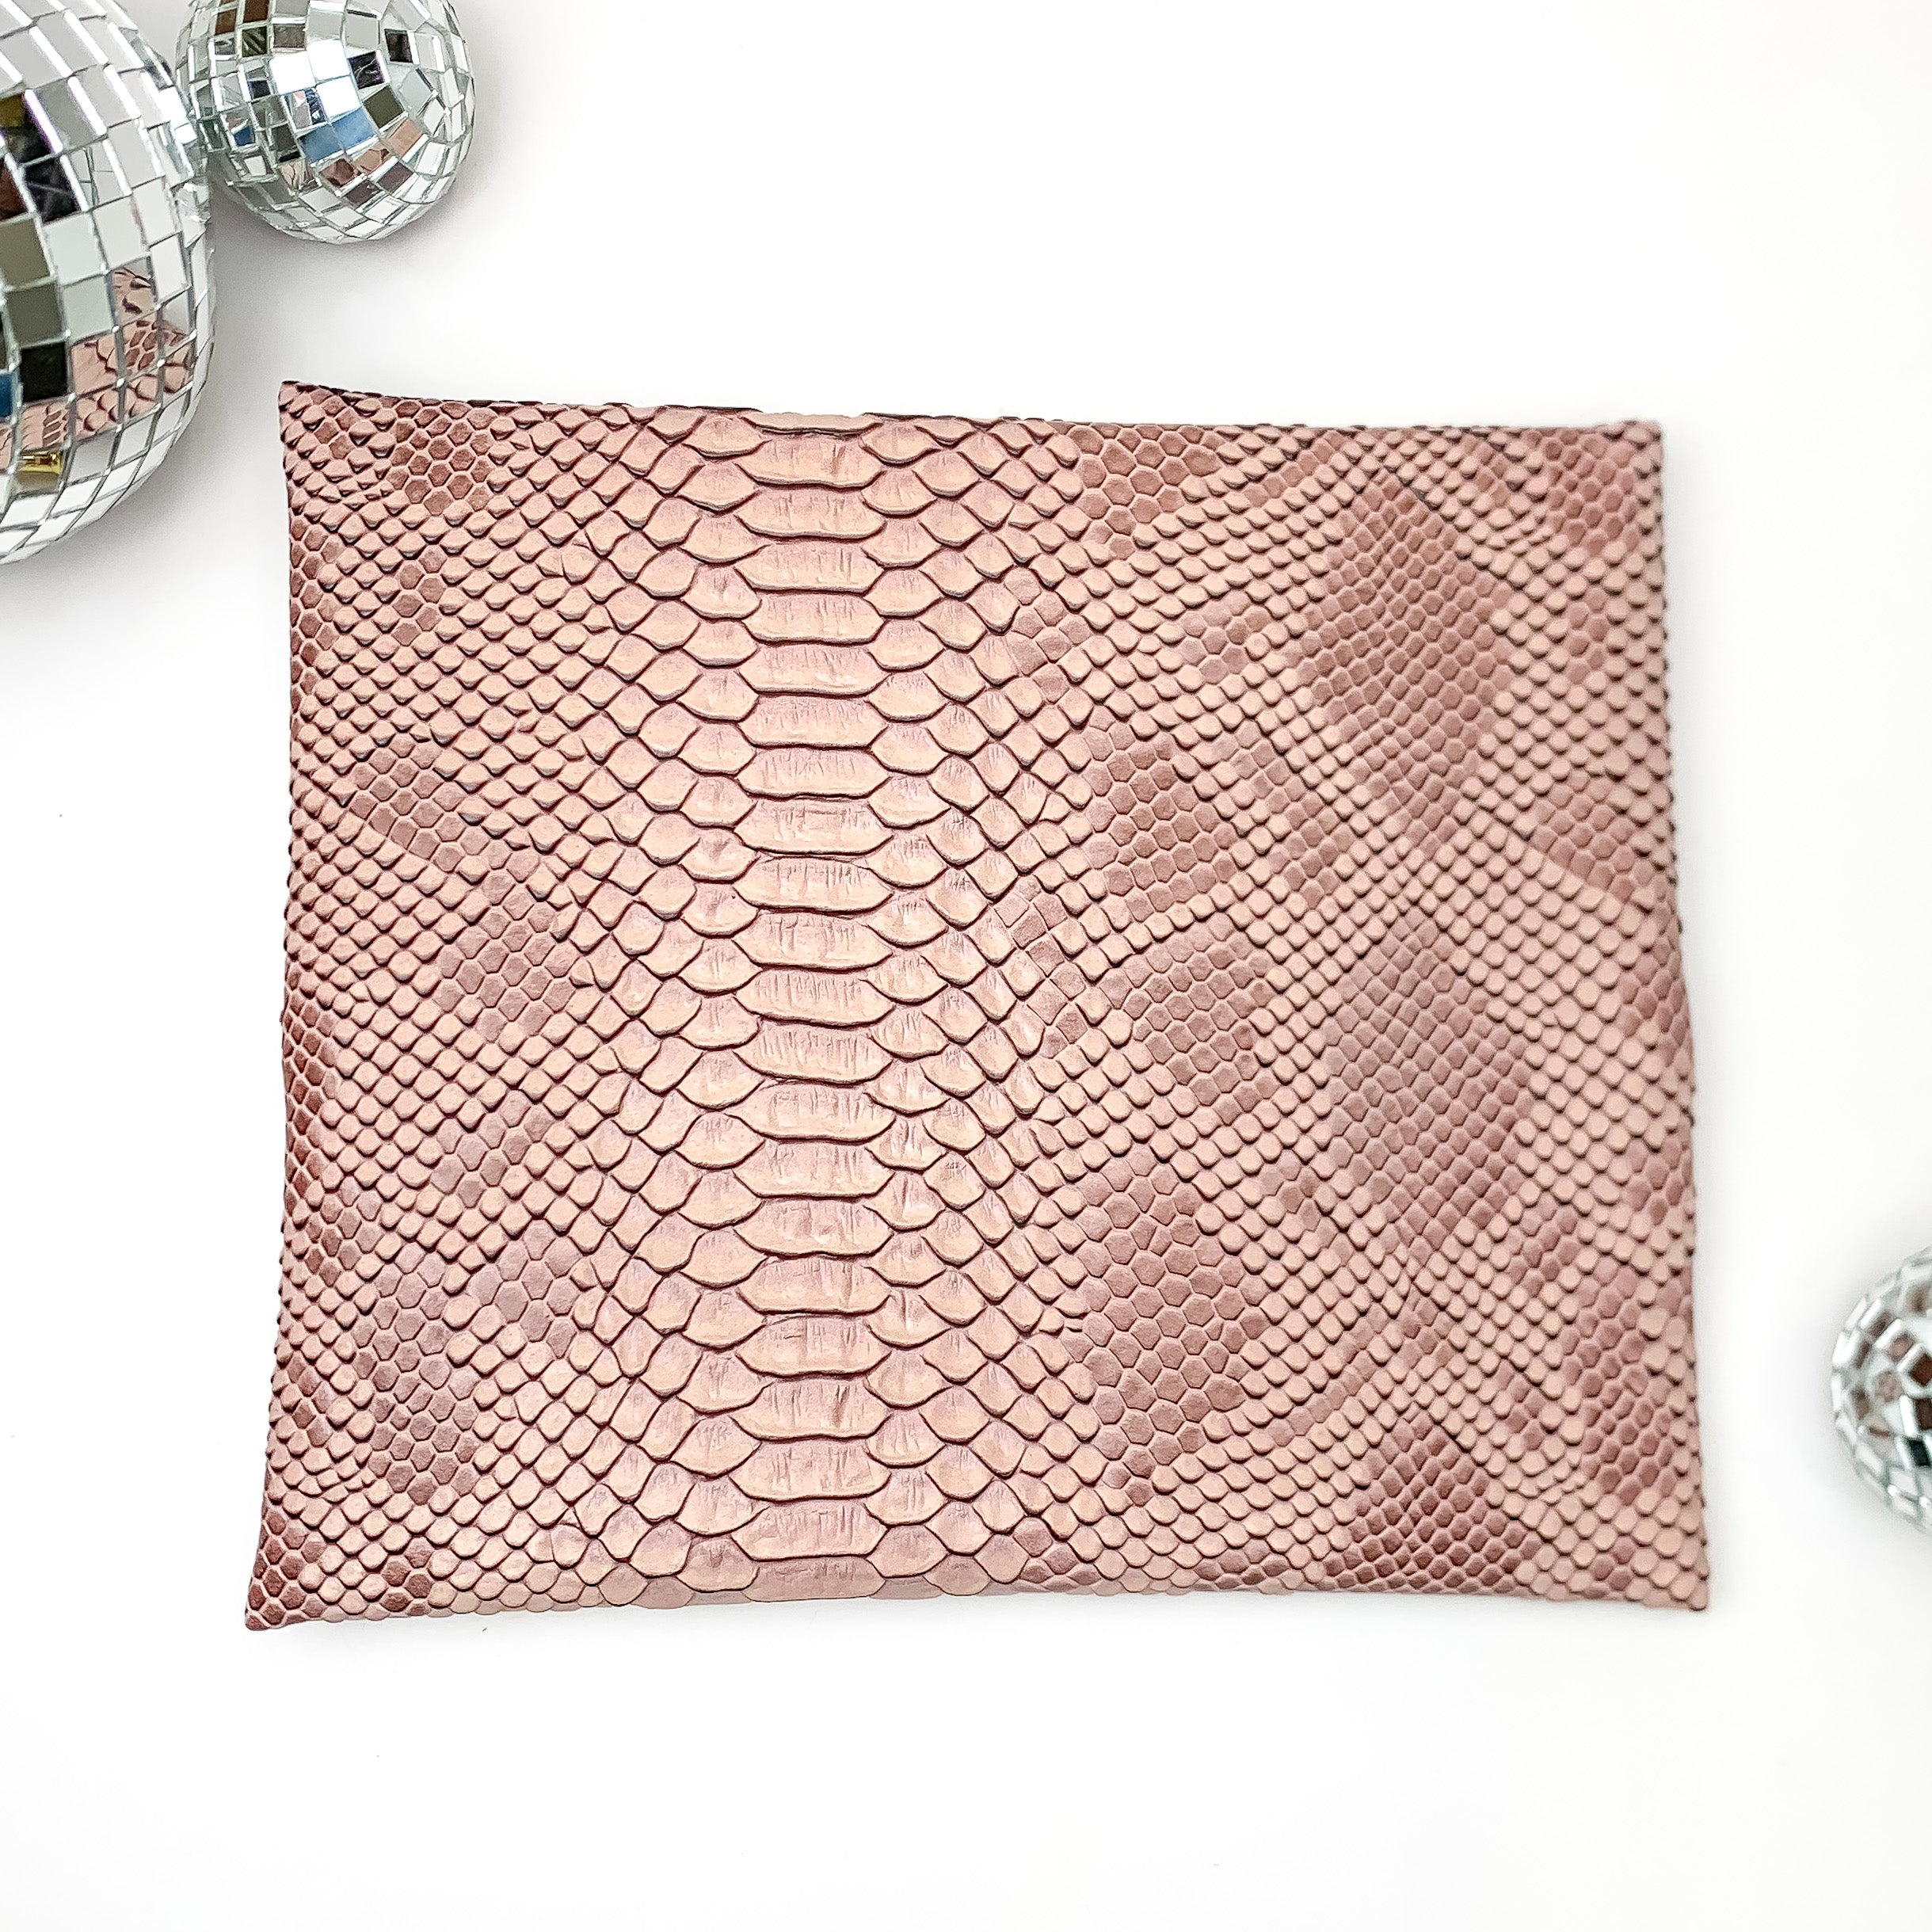 Makeup Junkie | Small Copperazzi Lay Flat Bag in Dusty Pink Snake Print